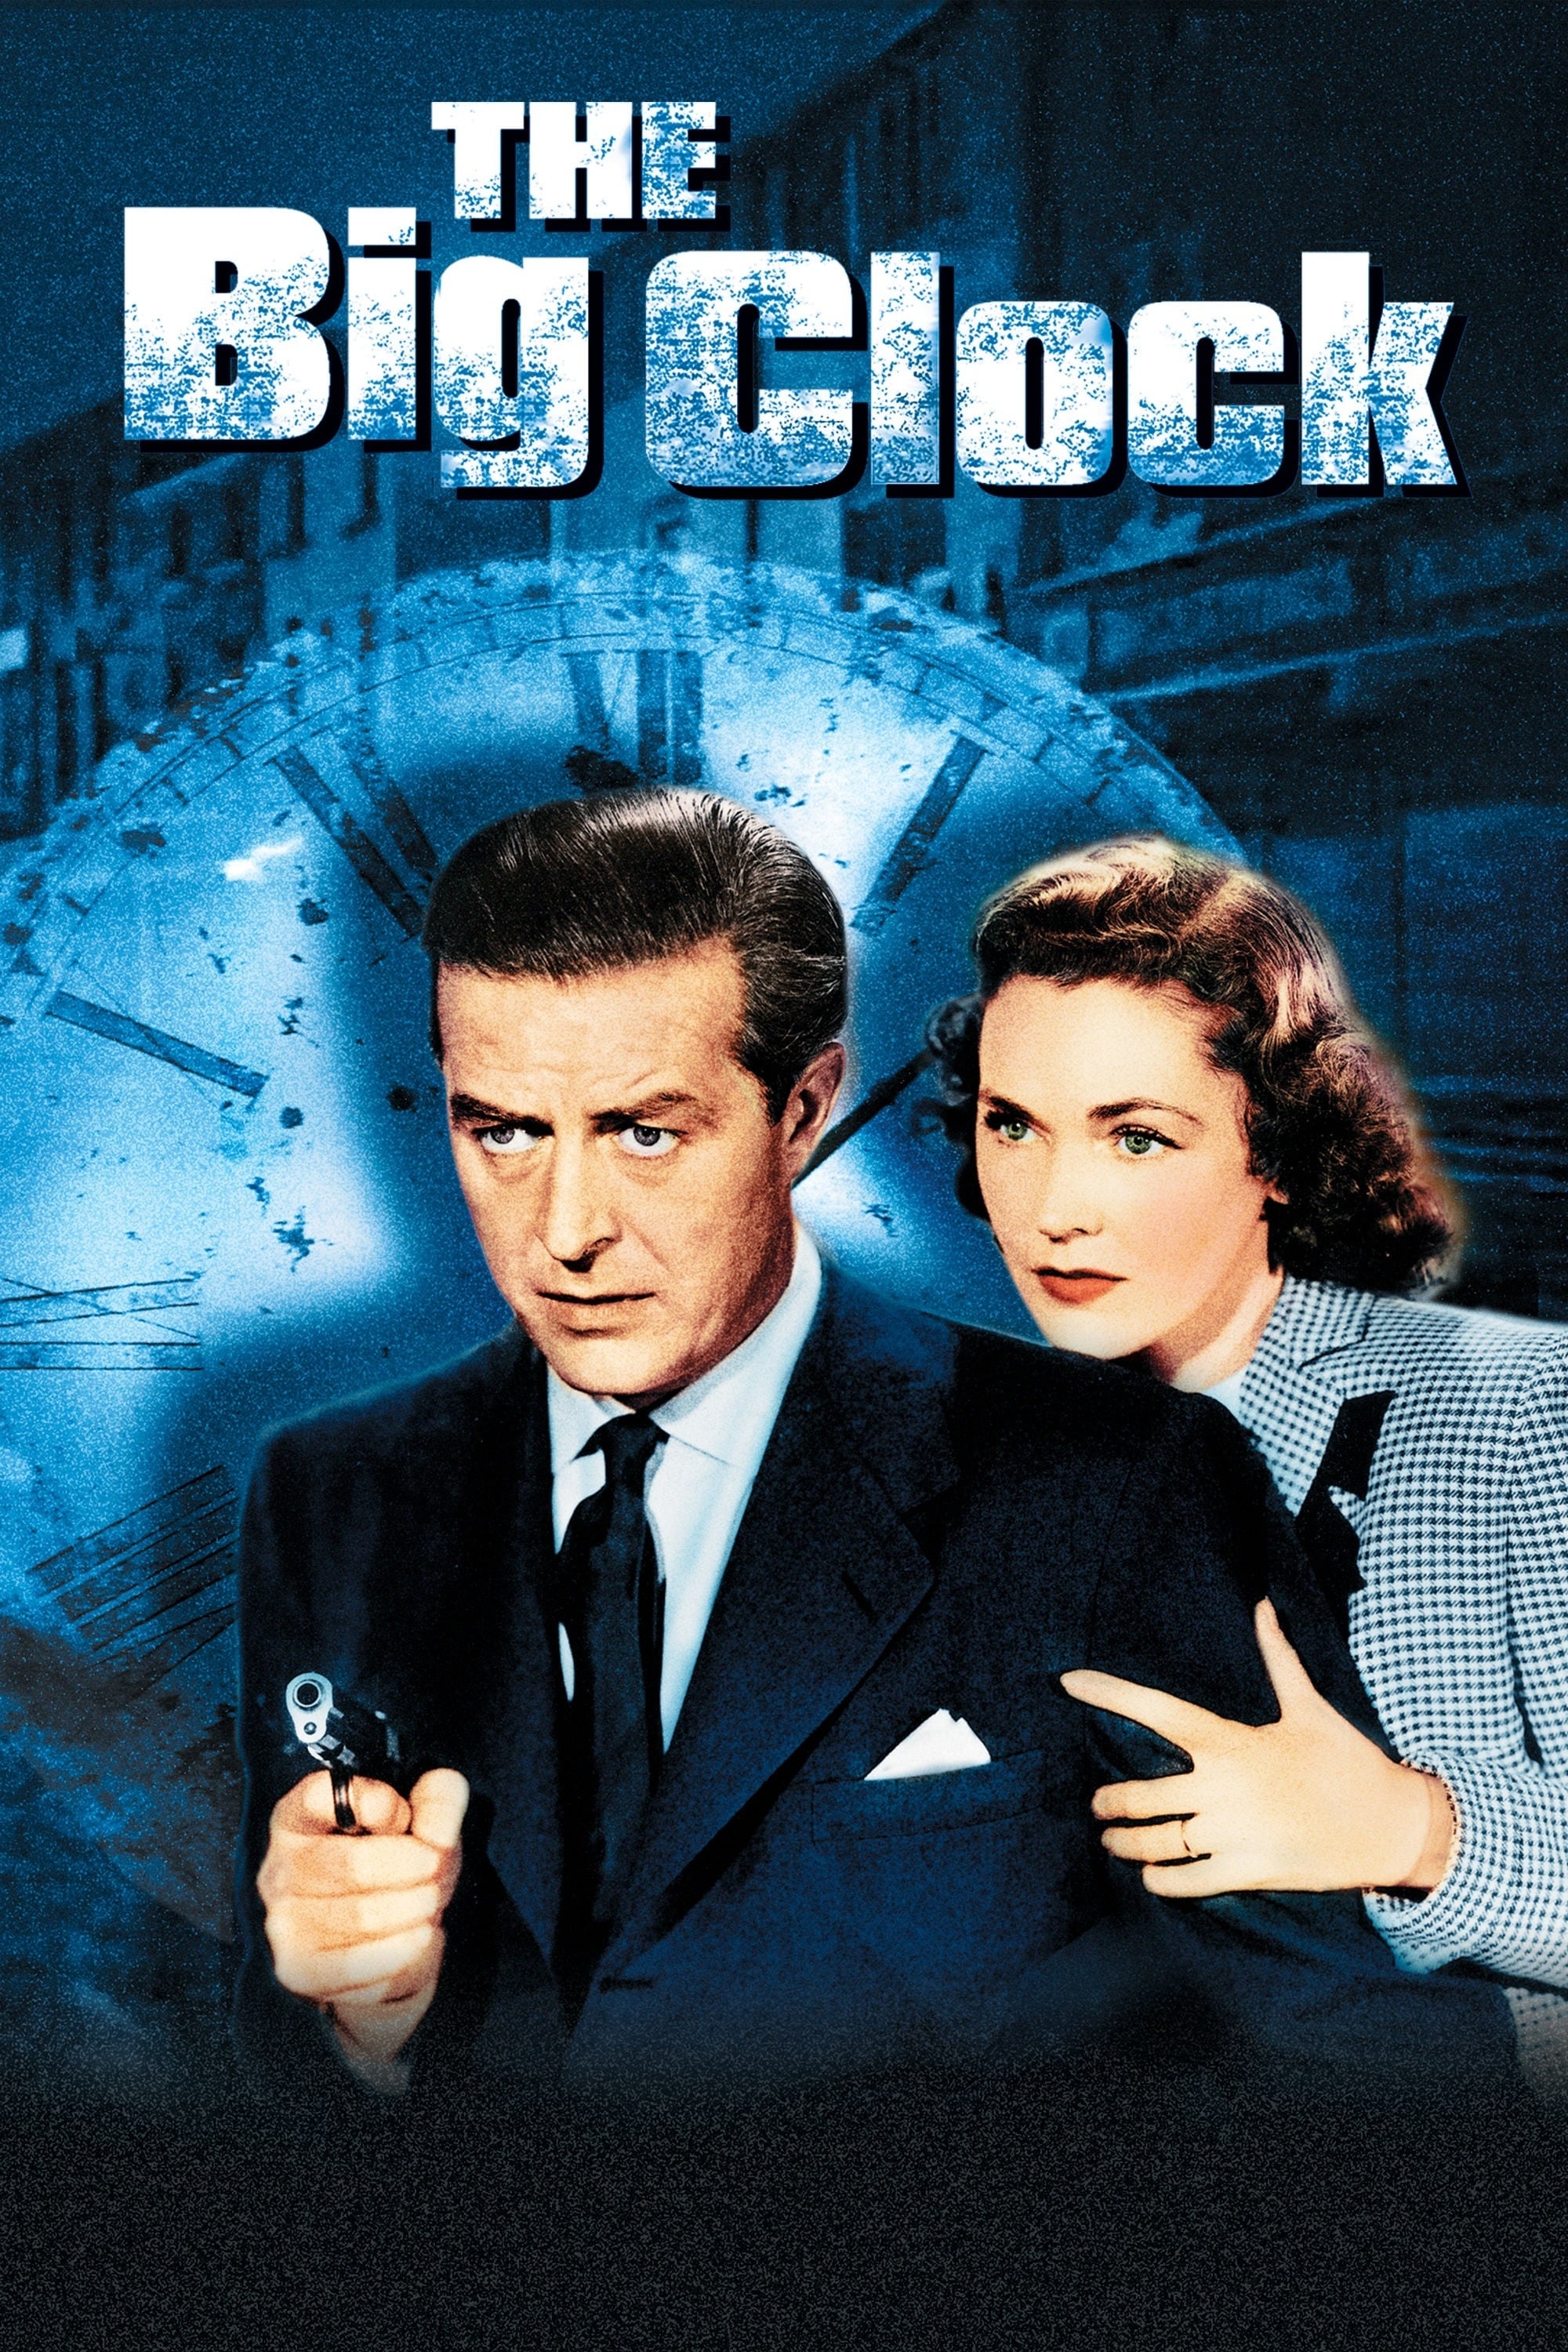 the big clock movie review